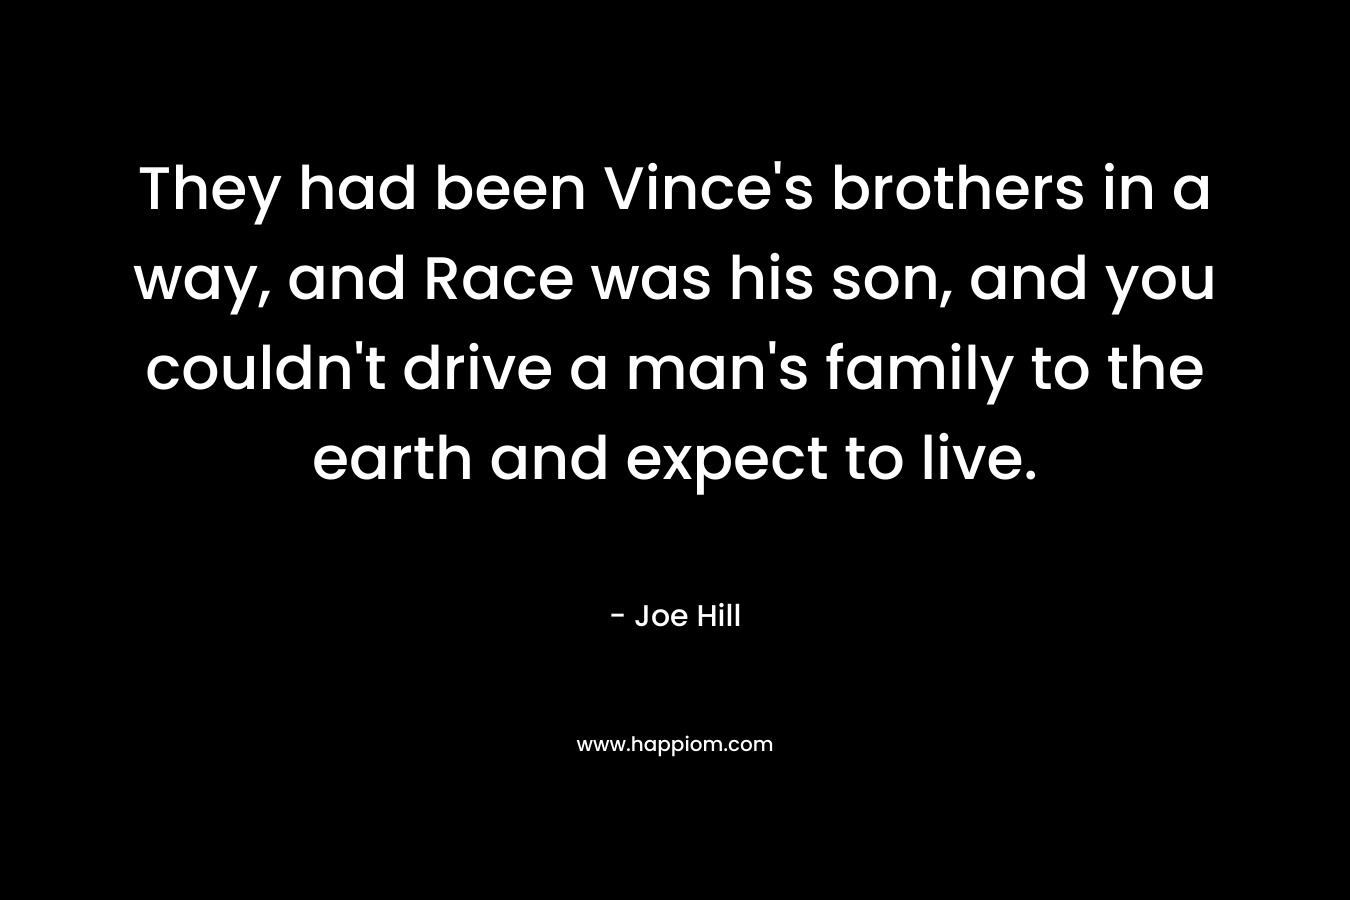 They had been Vince's brothers in a way, and Race was his son, and you couldn't drive a man's family to the earth and expect to live.